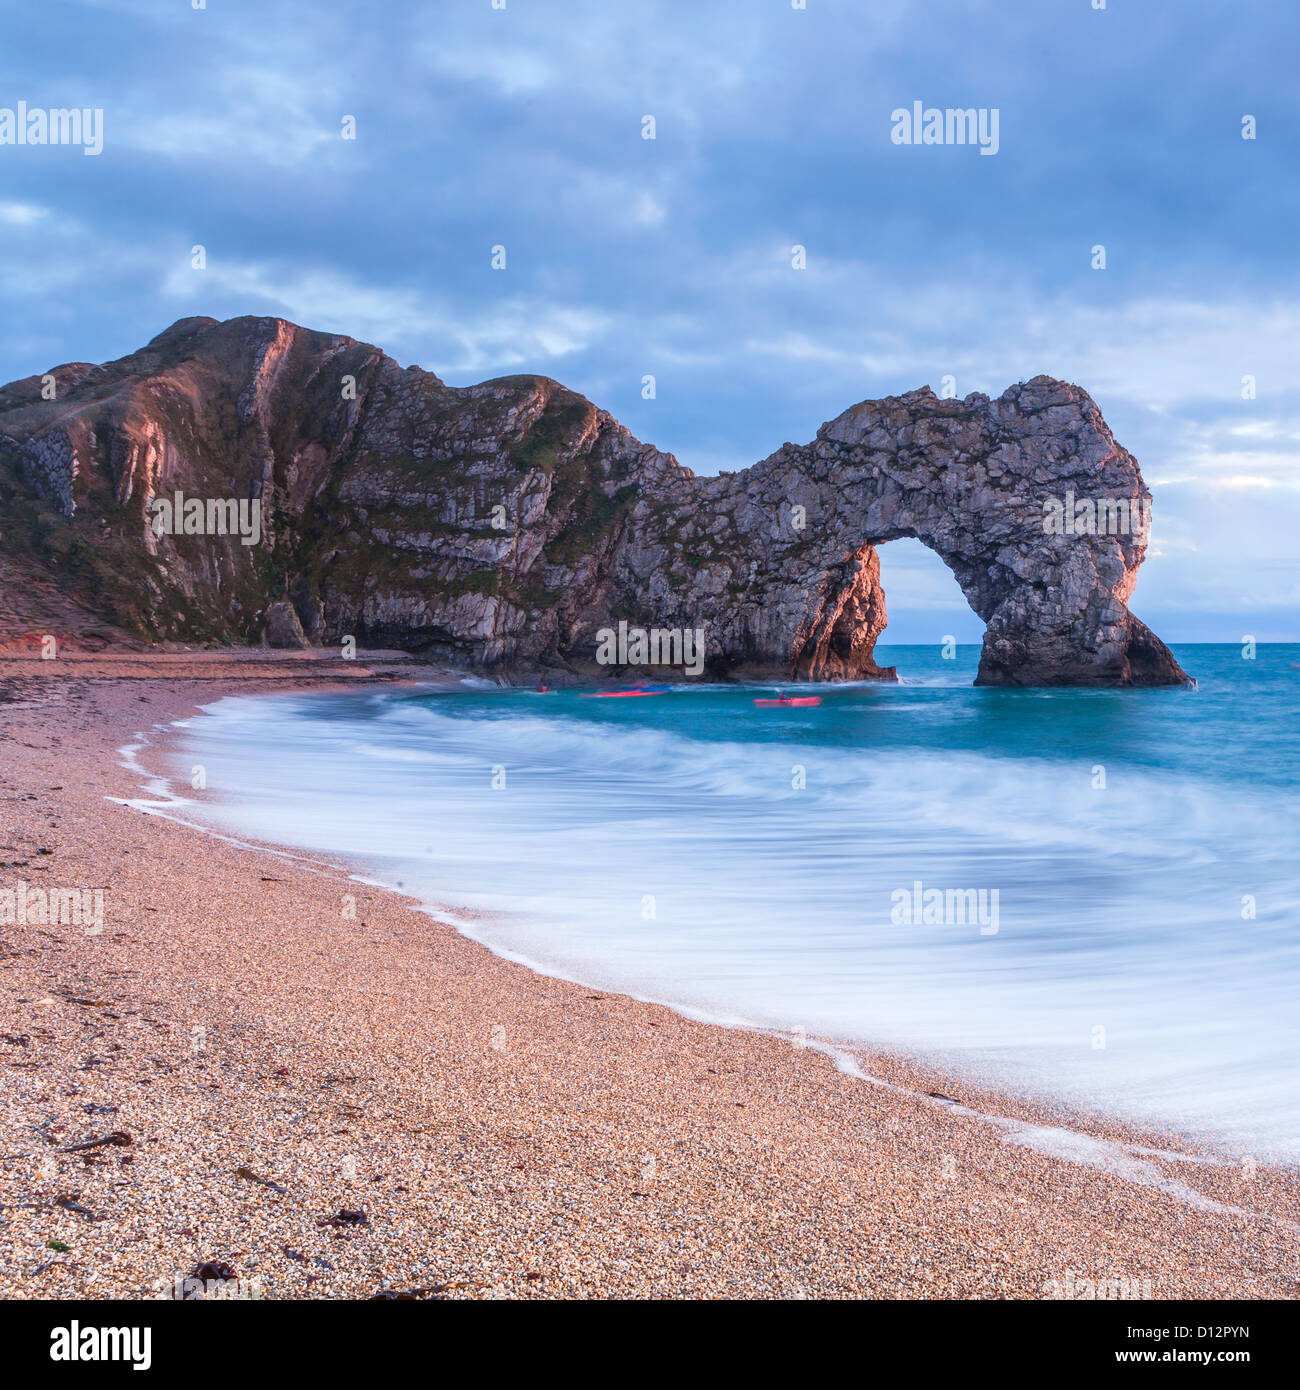 Durdle door with two red kayak's Stock Photo